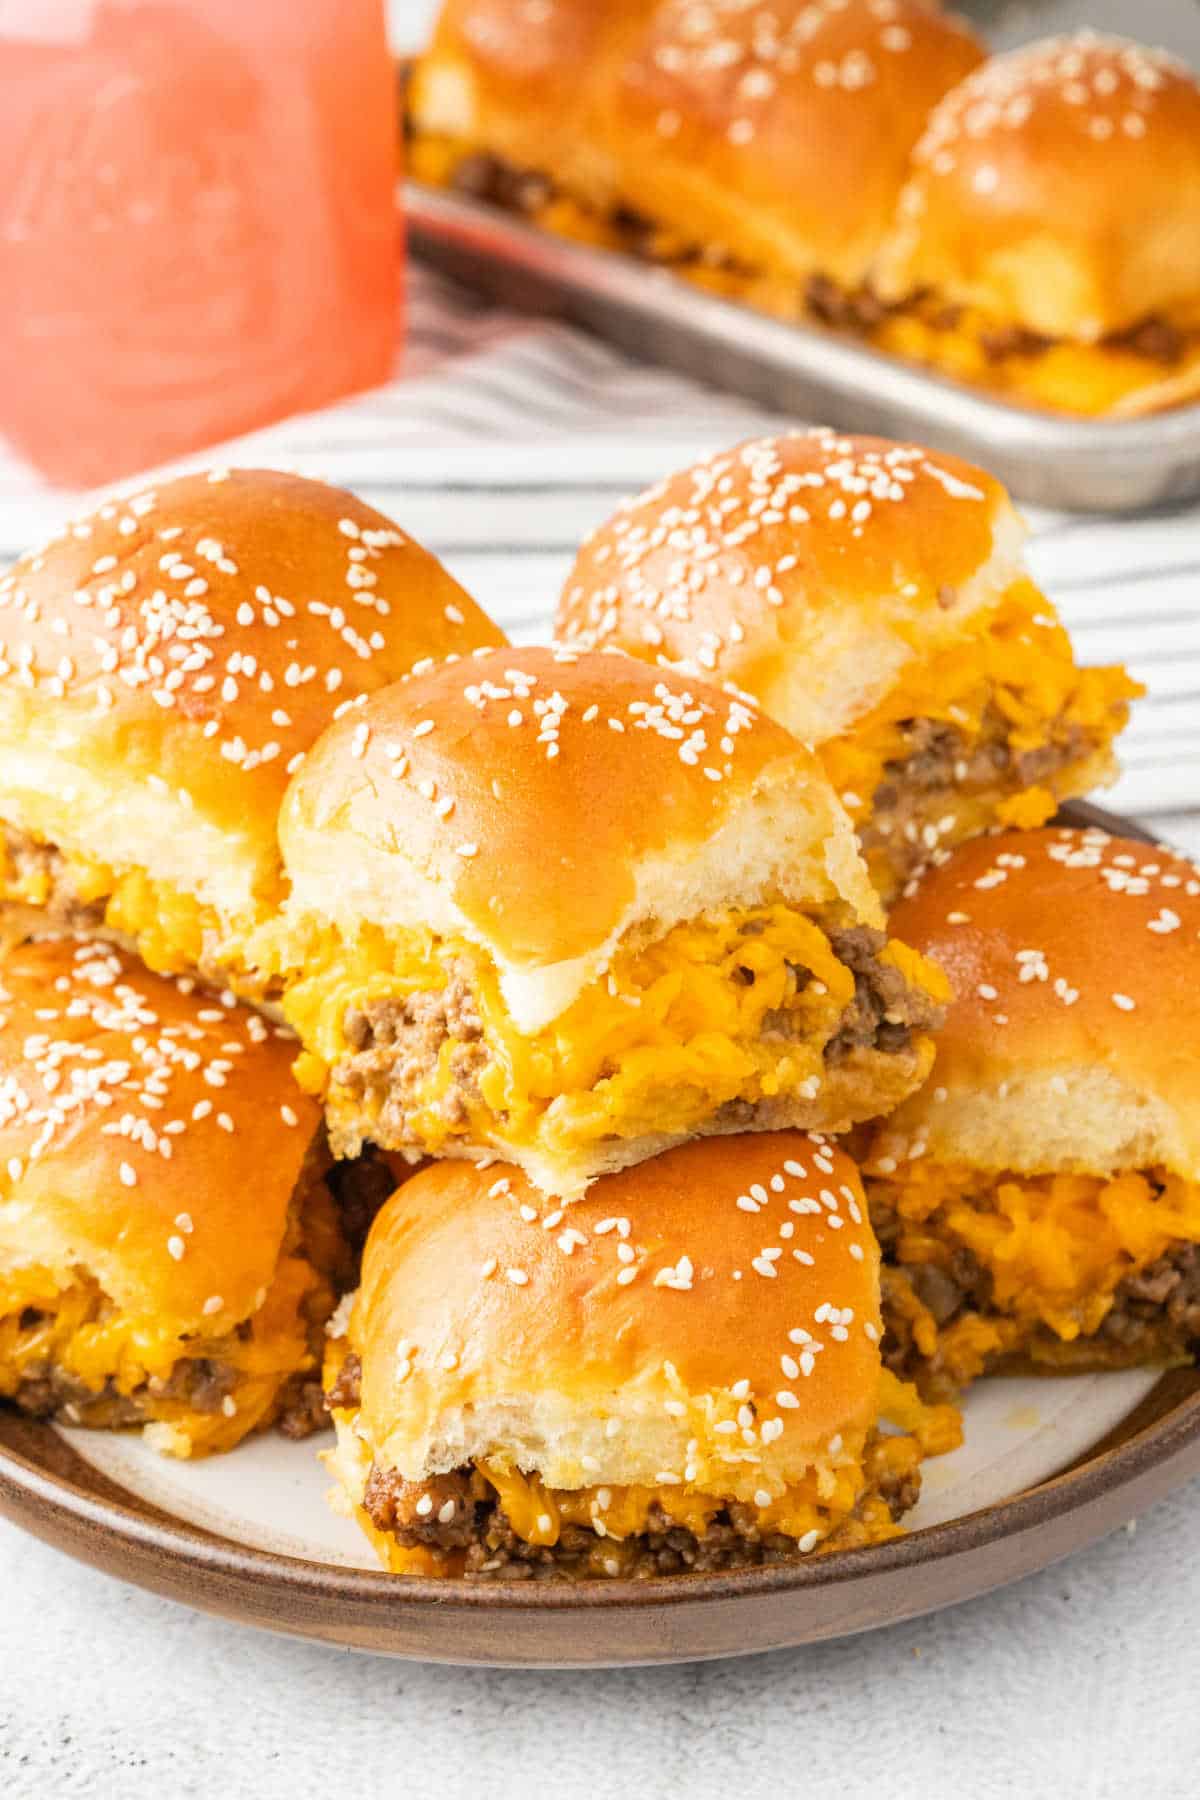 Cheeseburger sliders on a plate.